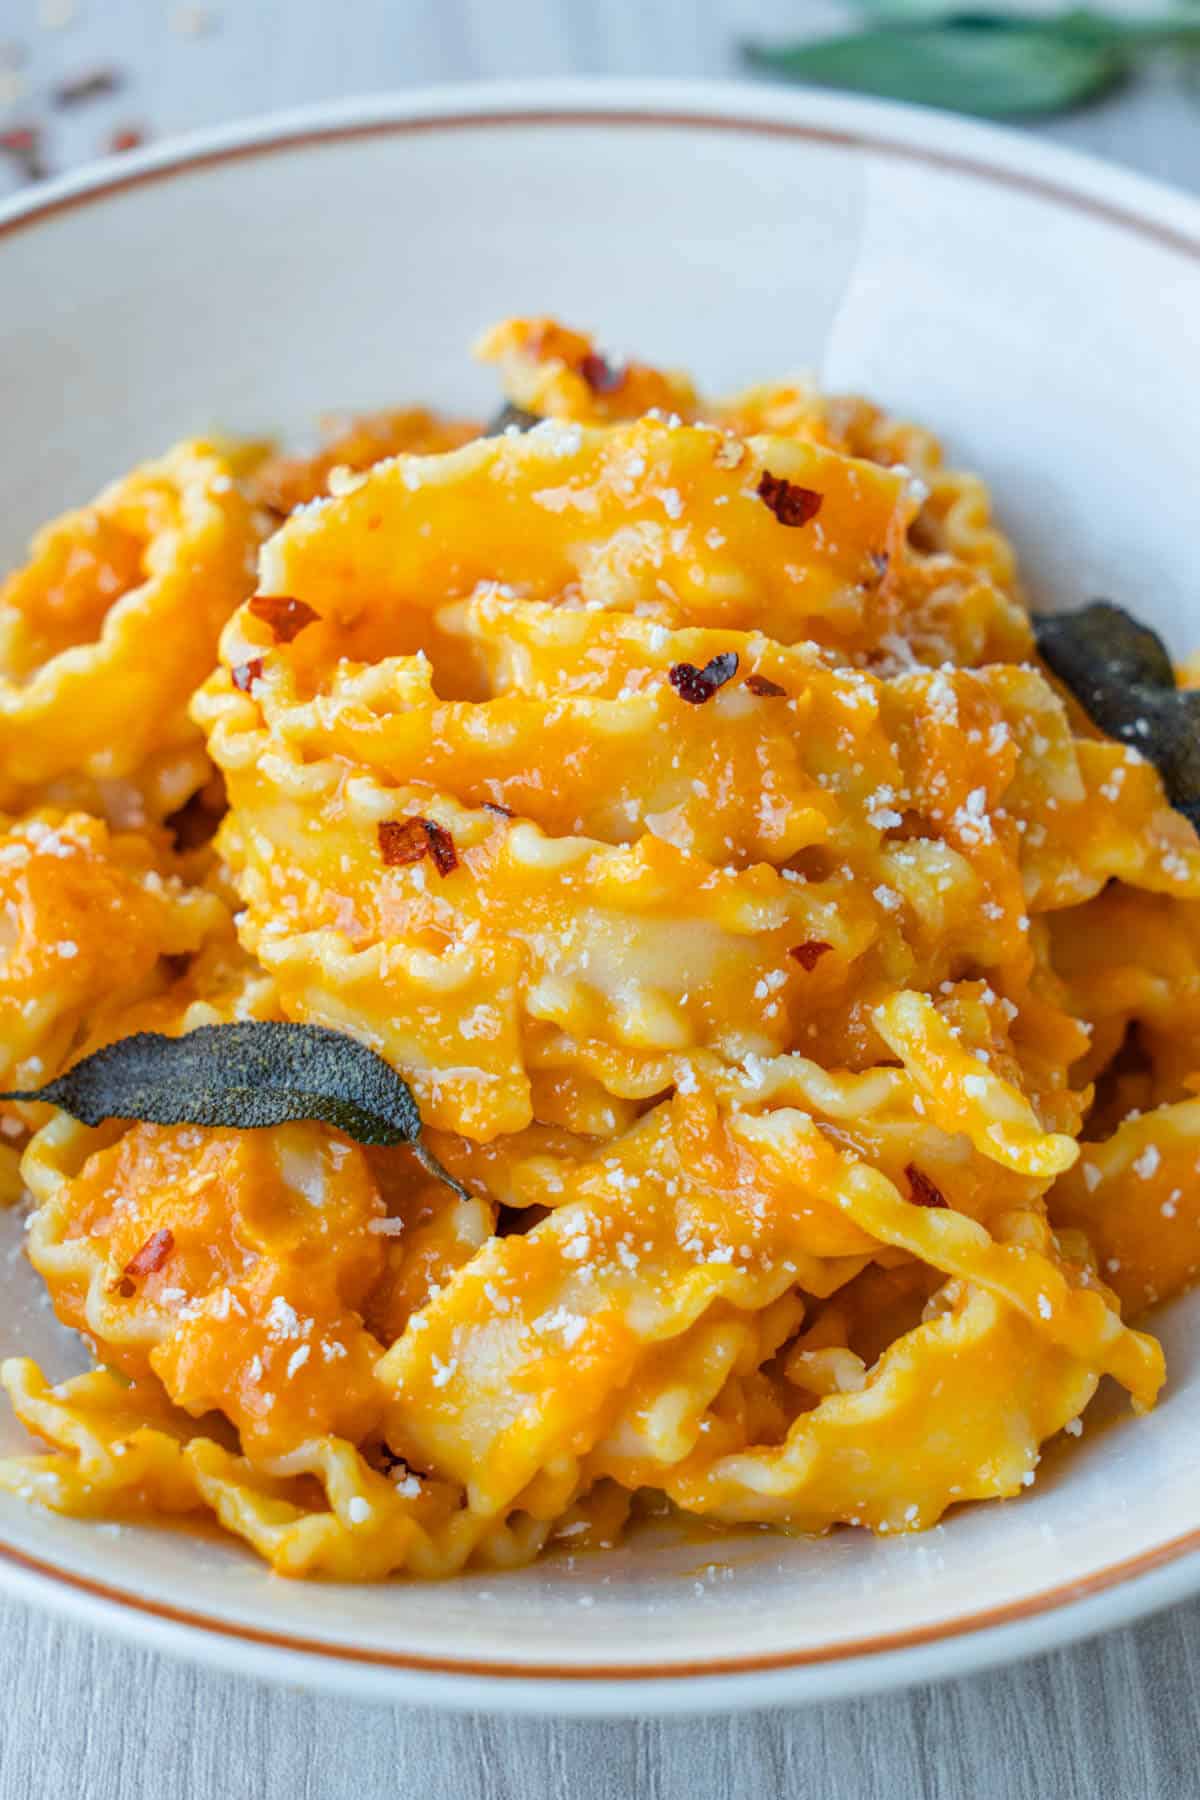 Pumpkin pasta sauce served with sage, chilli and parmesan